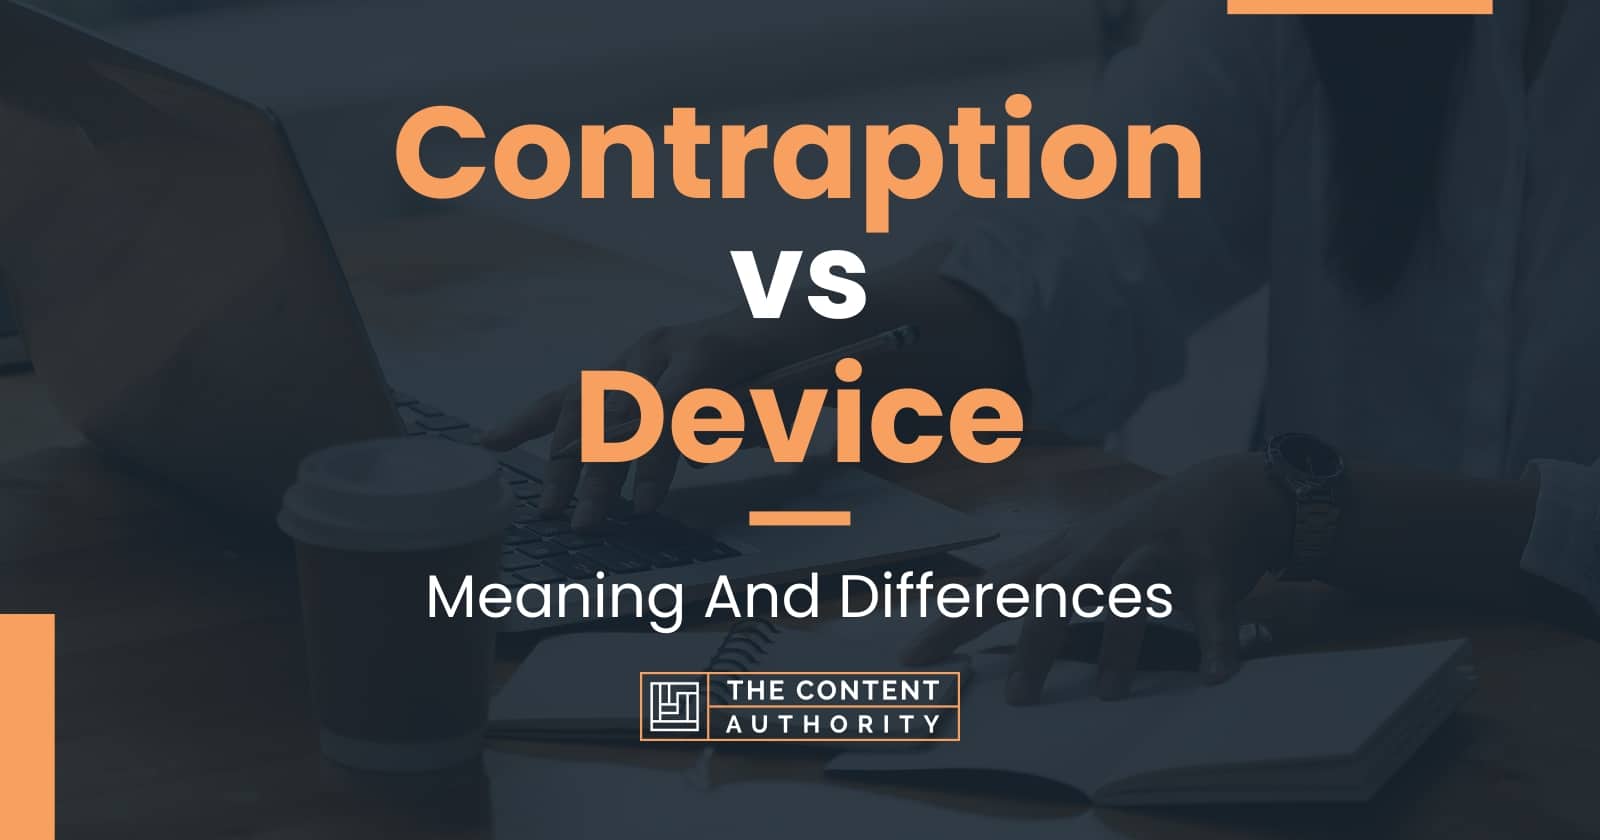 Contraption vs Device: Meaning And Differences